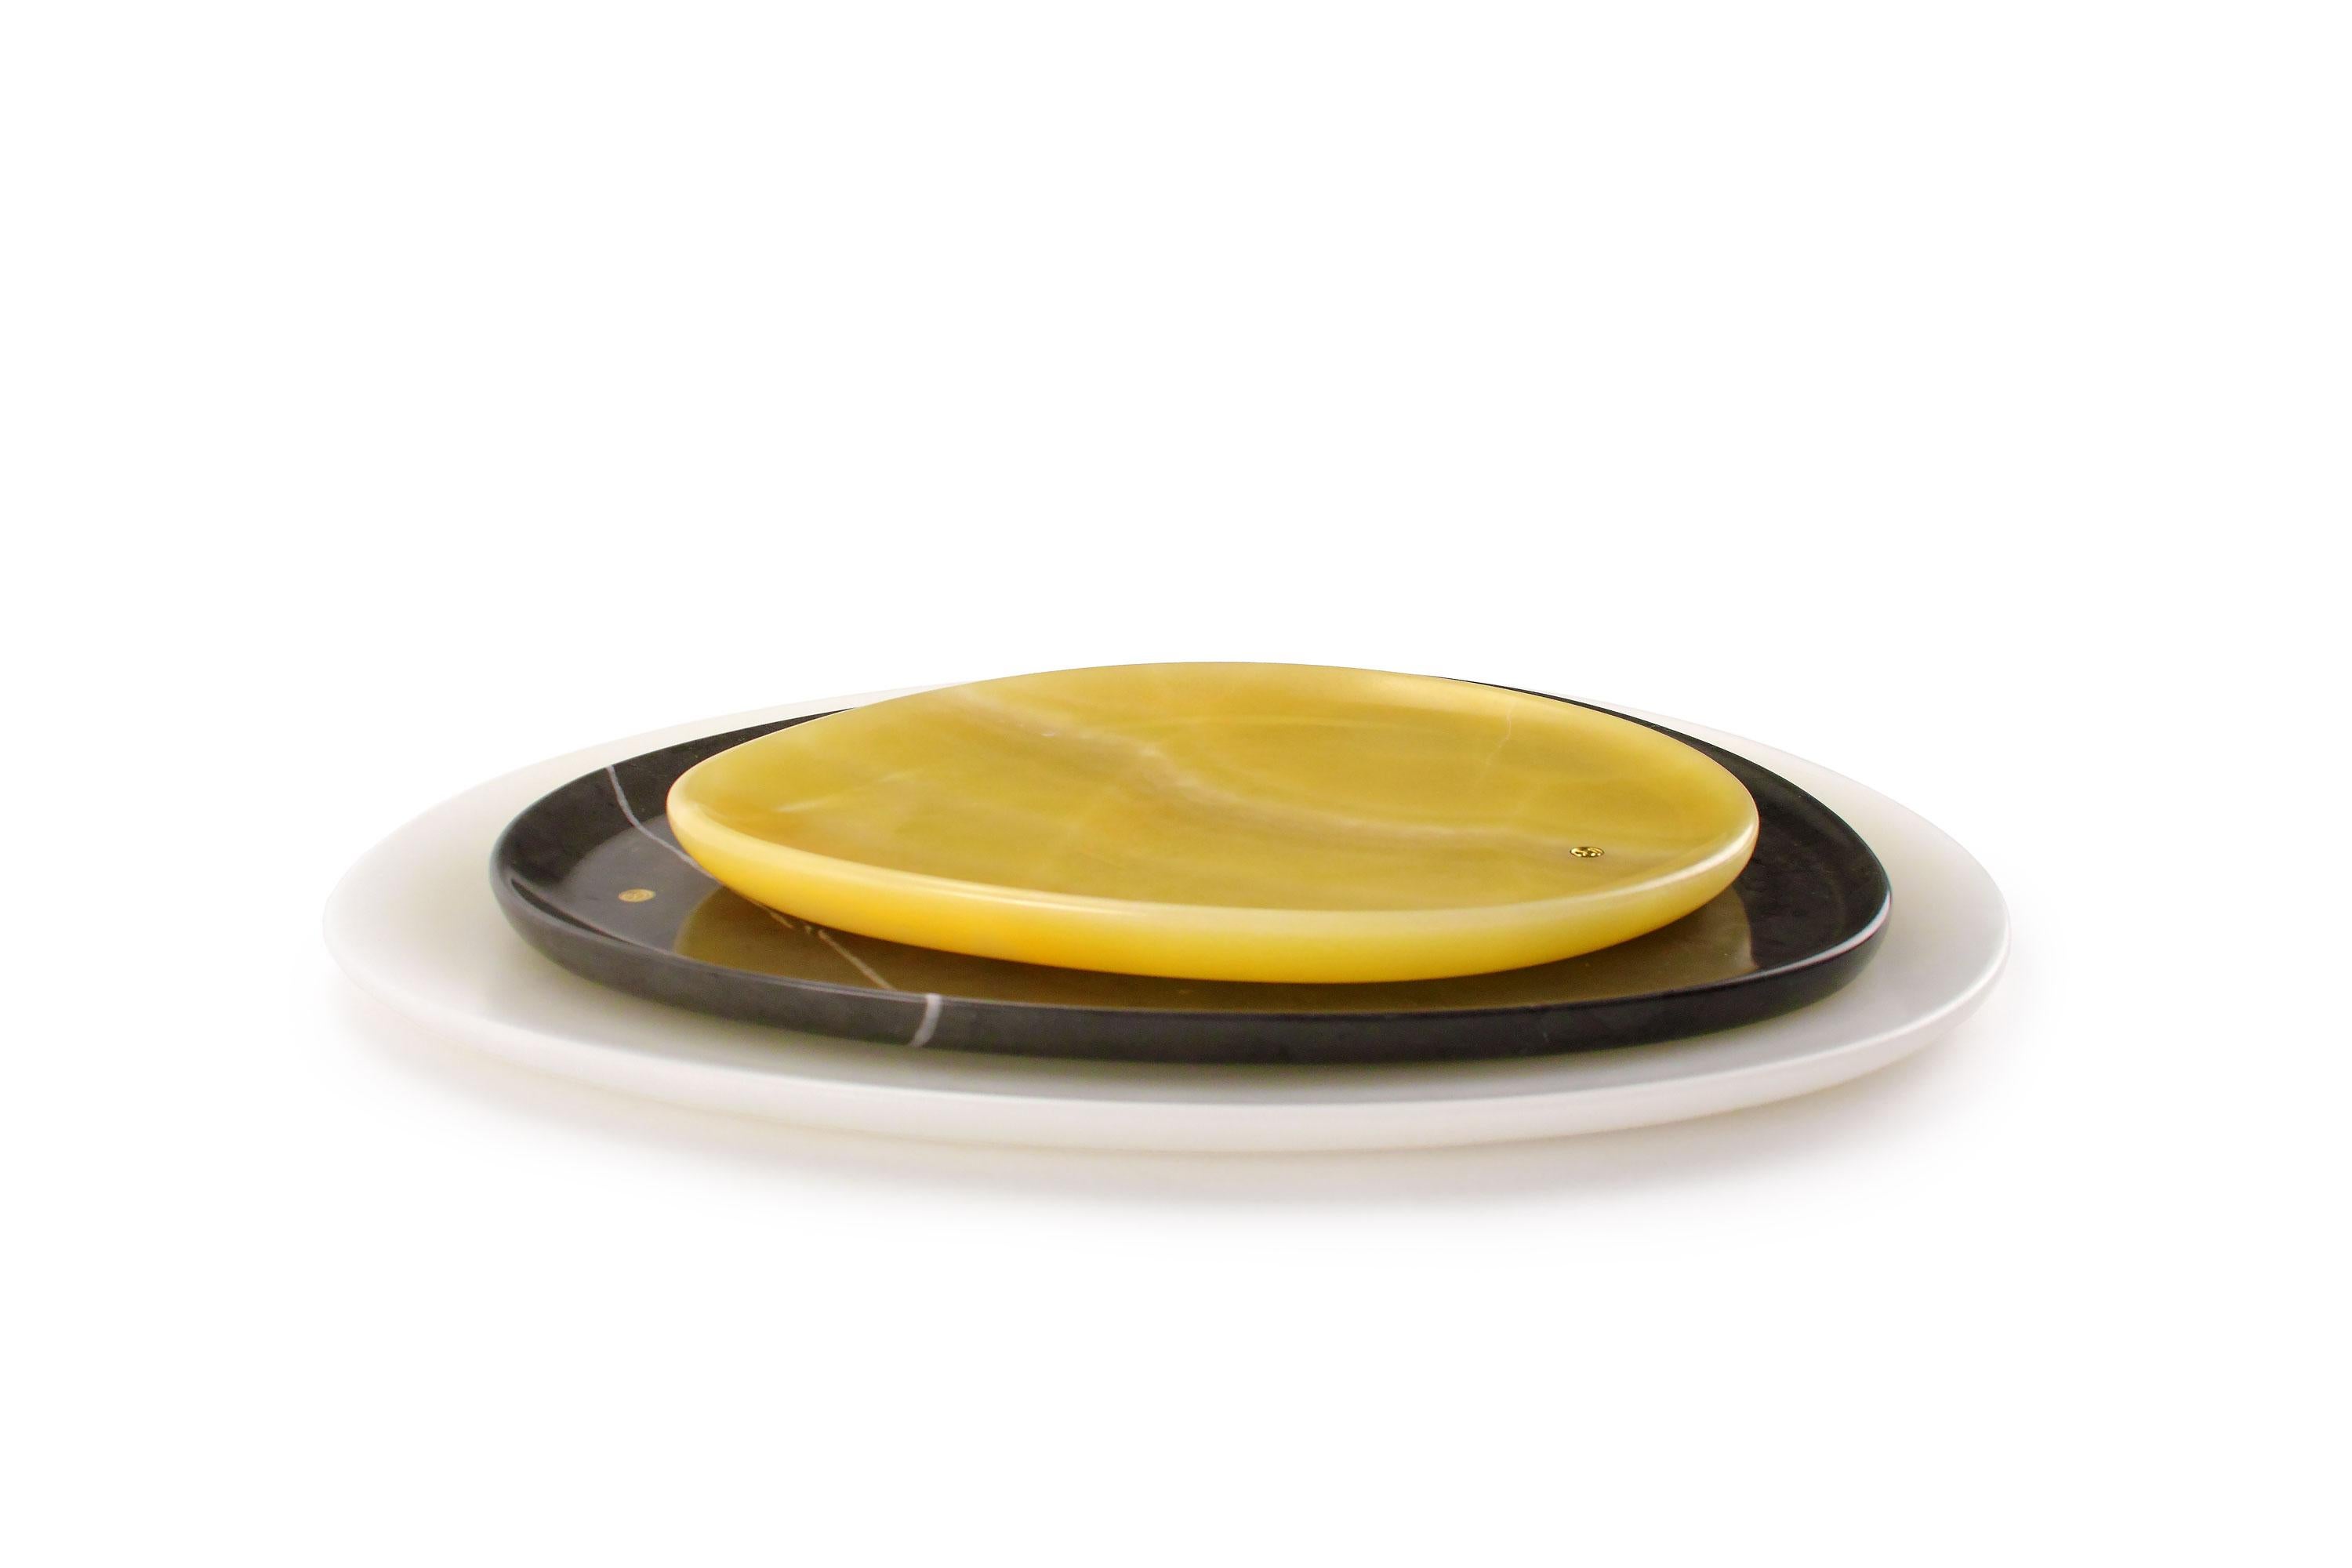 Hand carved presentation plates in Orange onyx, Grey stone and White onyx. Multiple use as plates, platters and placers. 

Dimensions: Small - L24 W20 H1.8 cm, Medium - L30 W28 H1.8 cm, Big - L36 W35 H1.8 cm.
Available in different marbles, onyx and